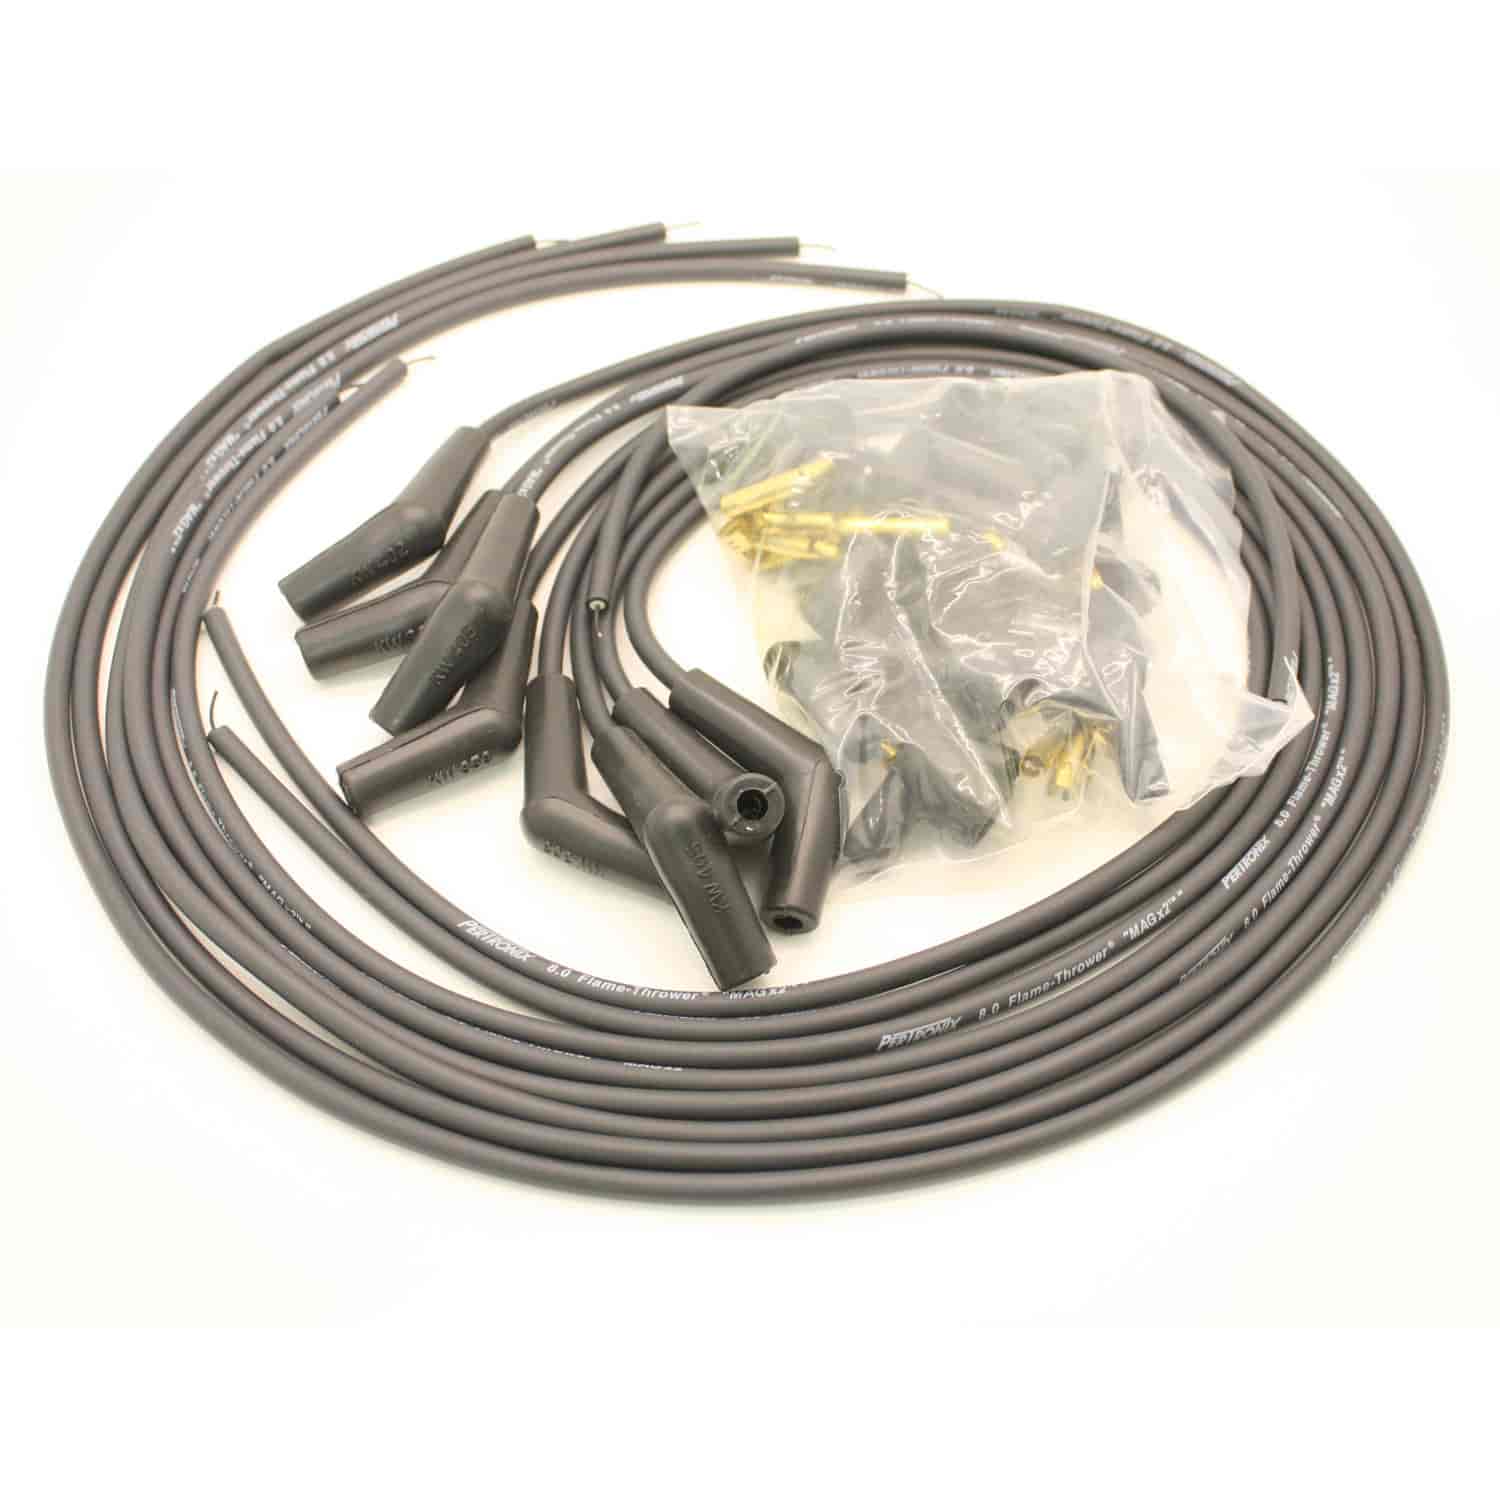 PerTronix 808490 Flame-Thrower Spark Plug Wires 8 cyl 8mm